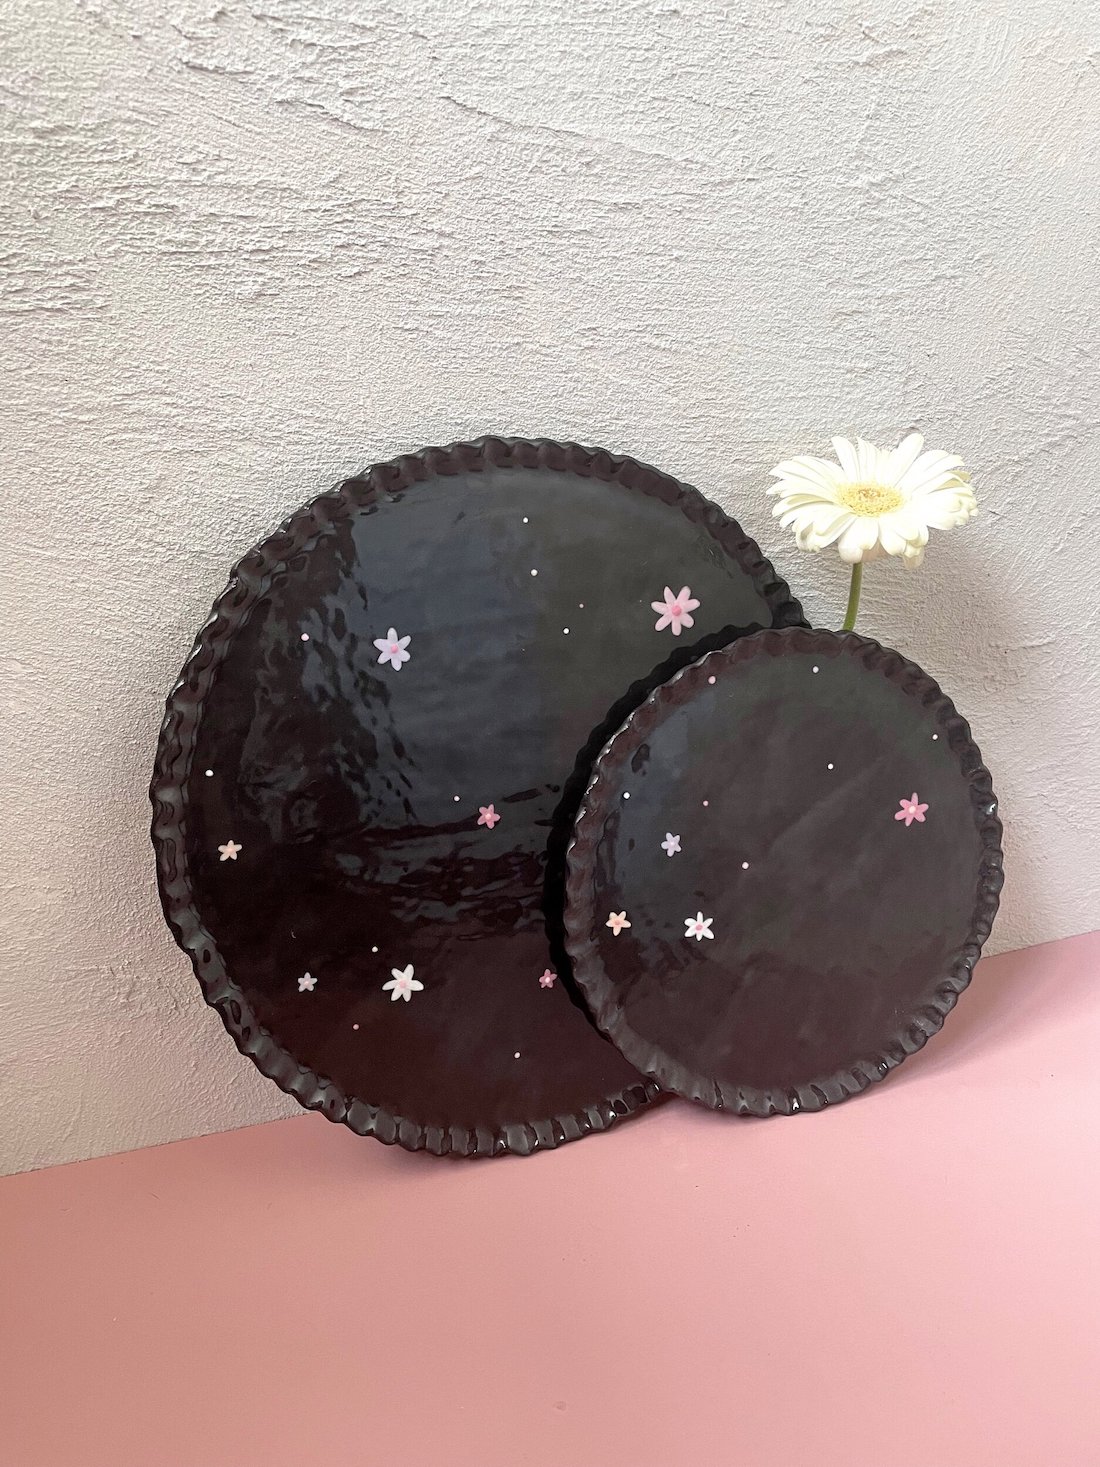 Night garden plate by Paxxy and Flora